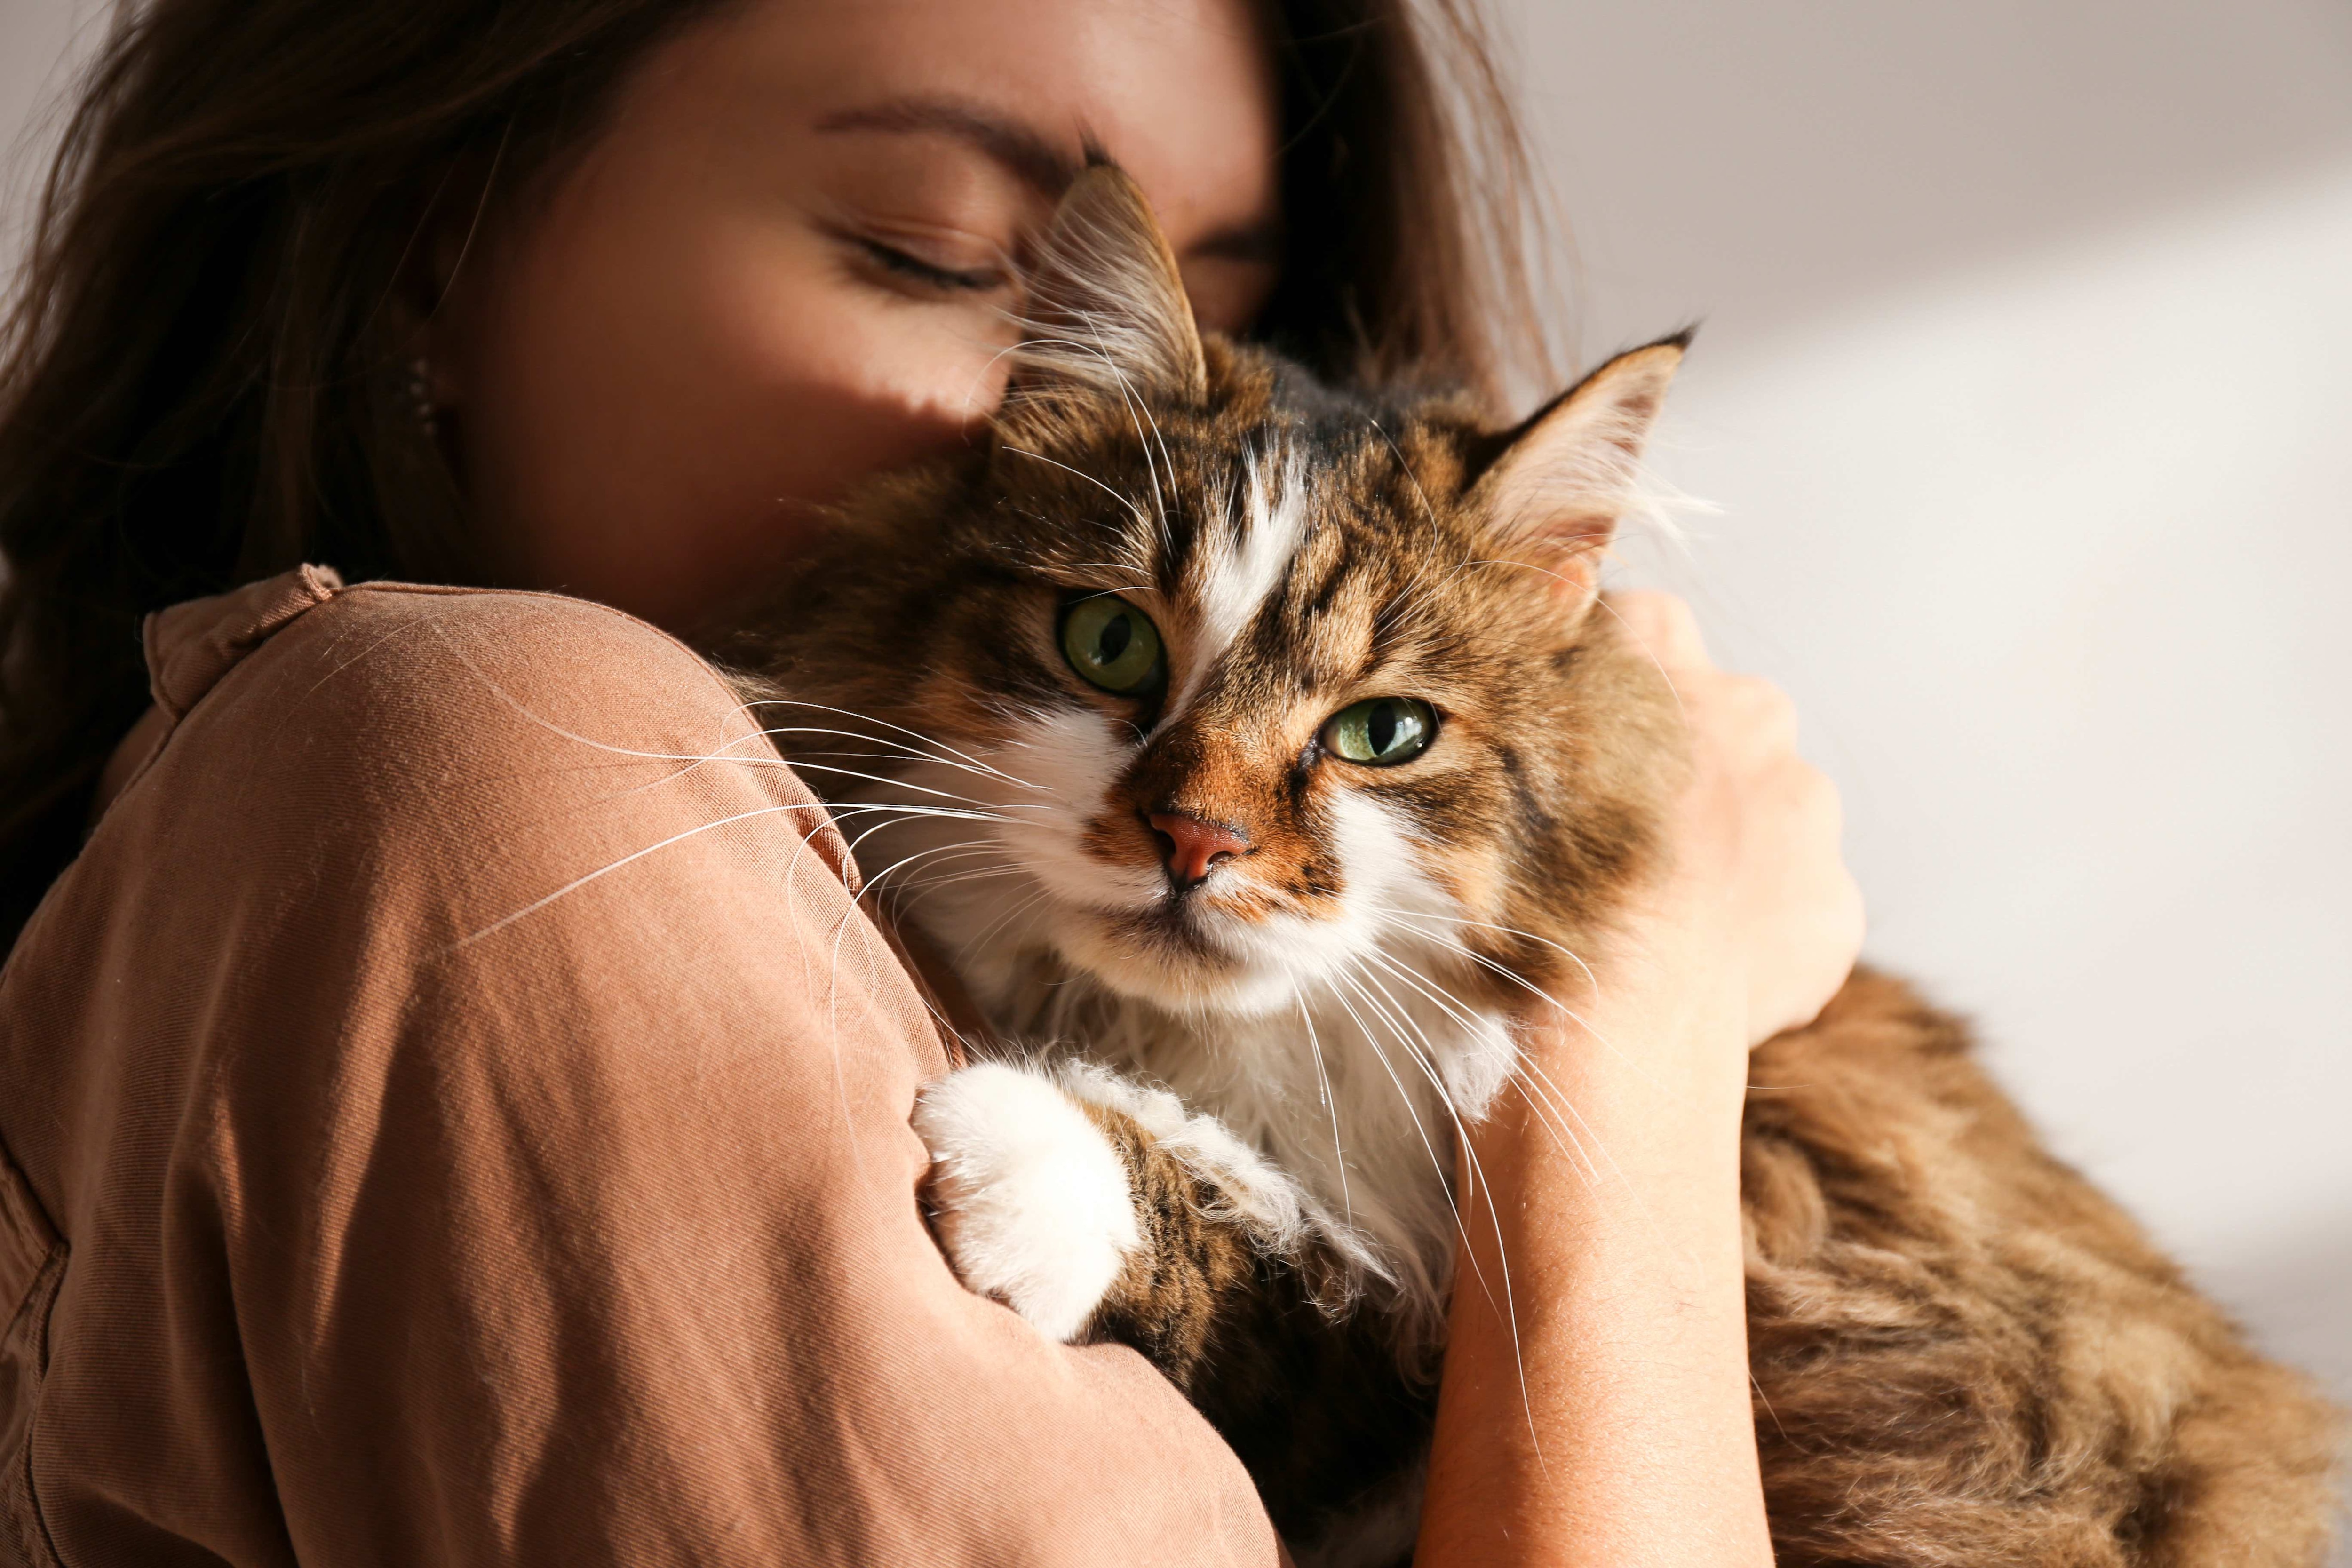 woman snuggling a longhair brown and white siberian cat